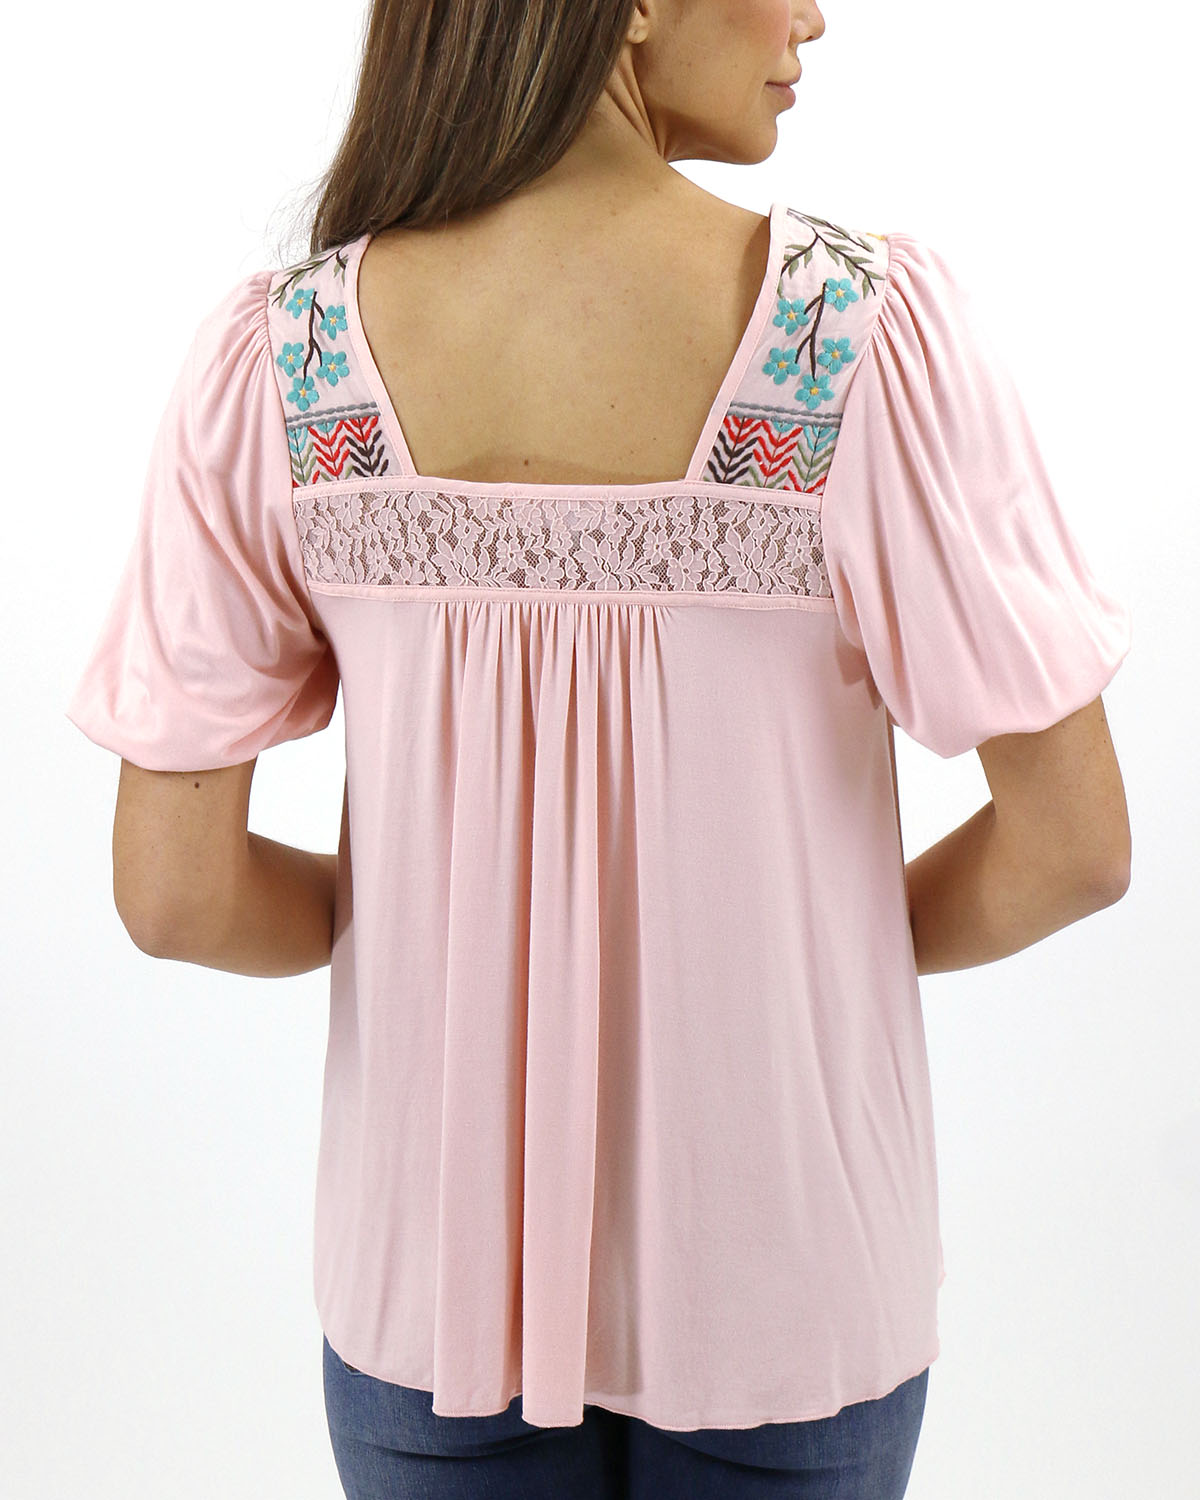 Lucky Brand Women's Embroidered Square Neck TOP Shirt, Blossom